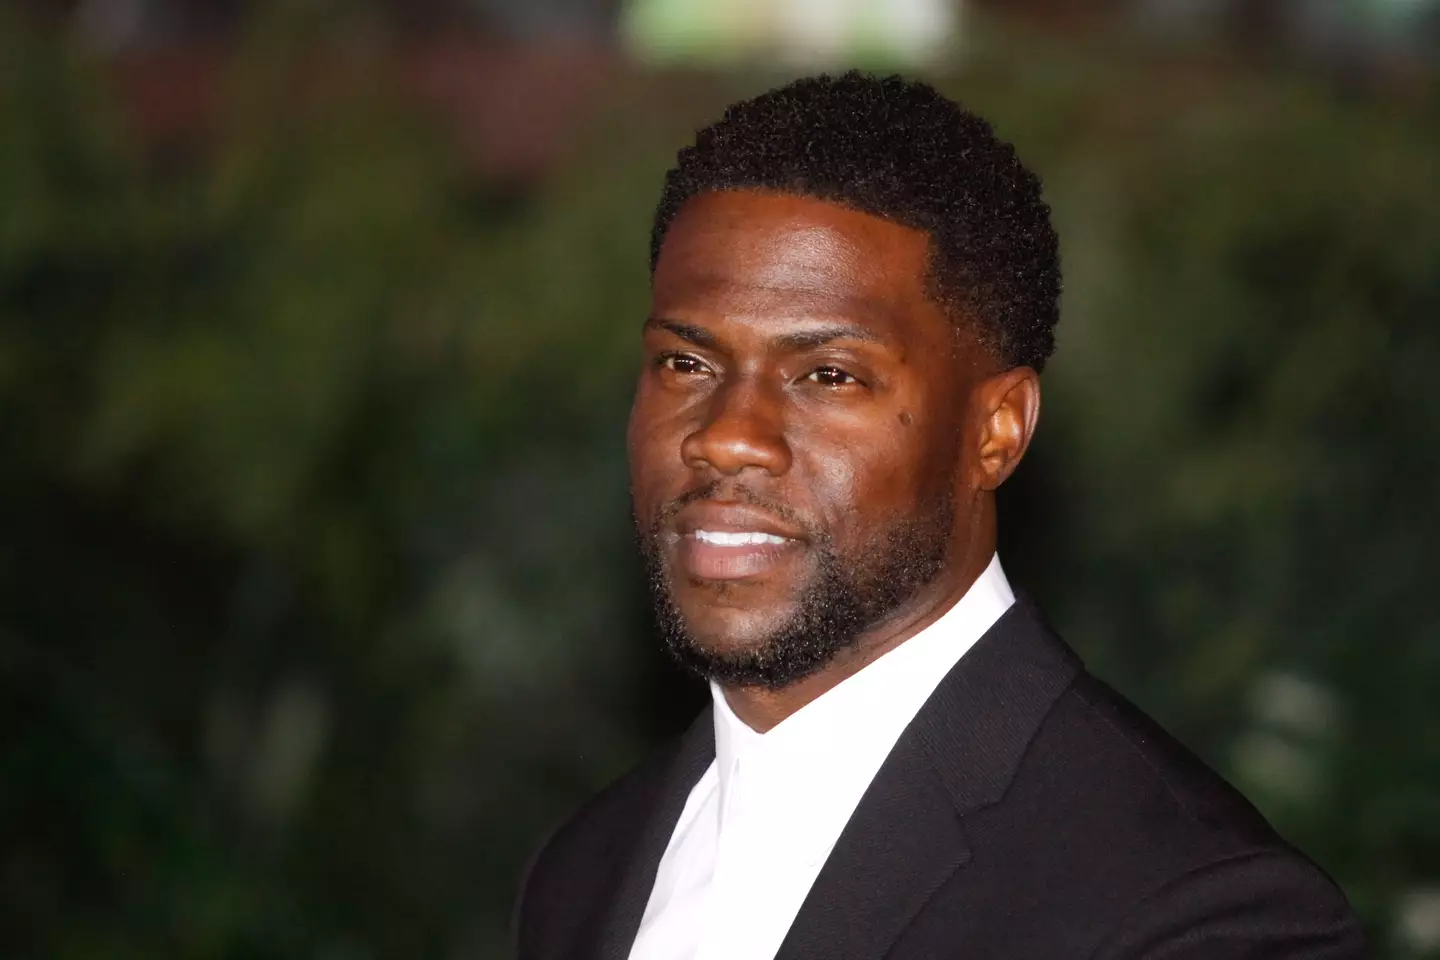 Kevin Hart paid tribute to everything his dad had done for him.